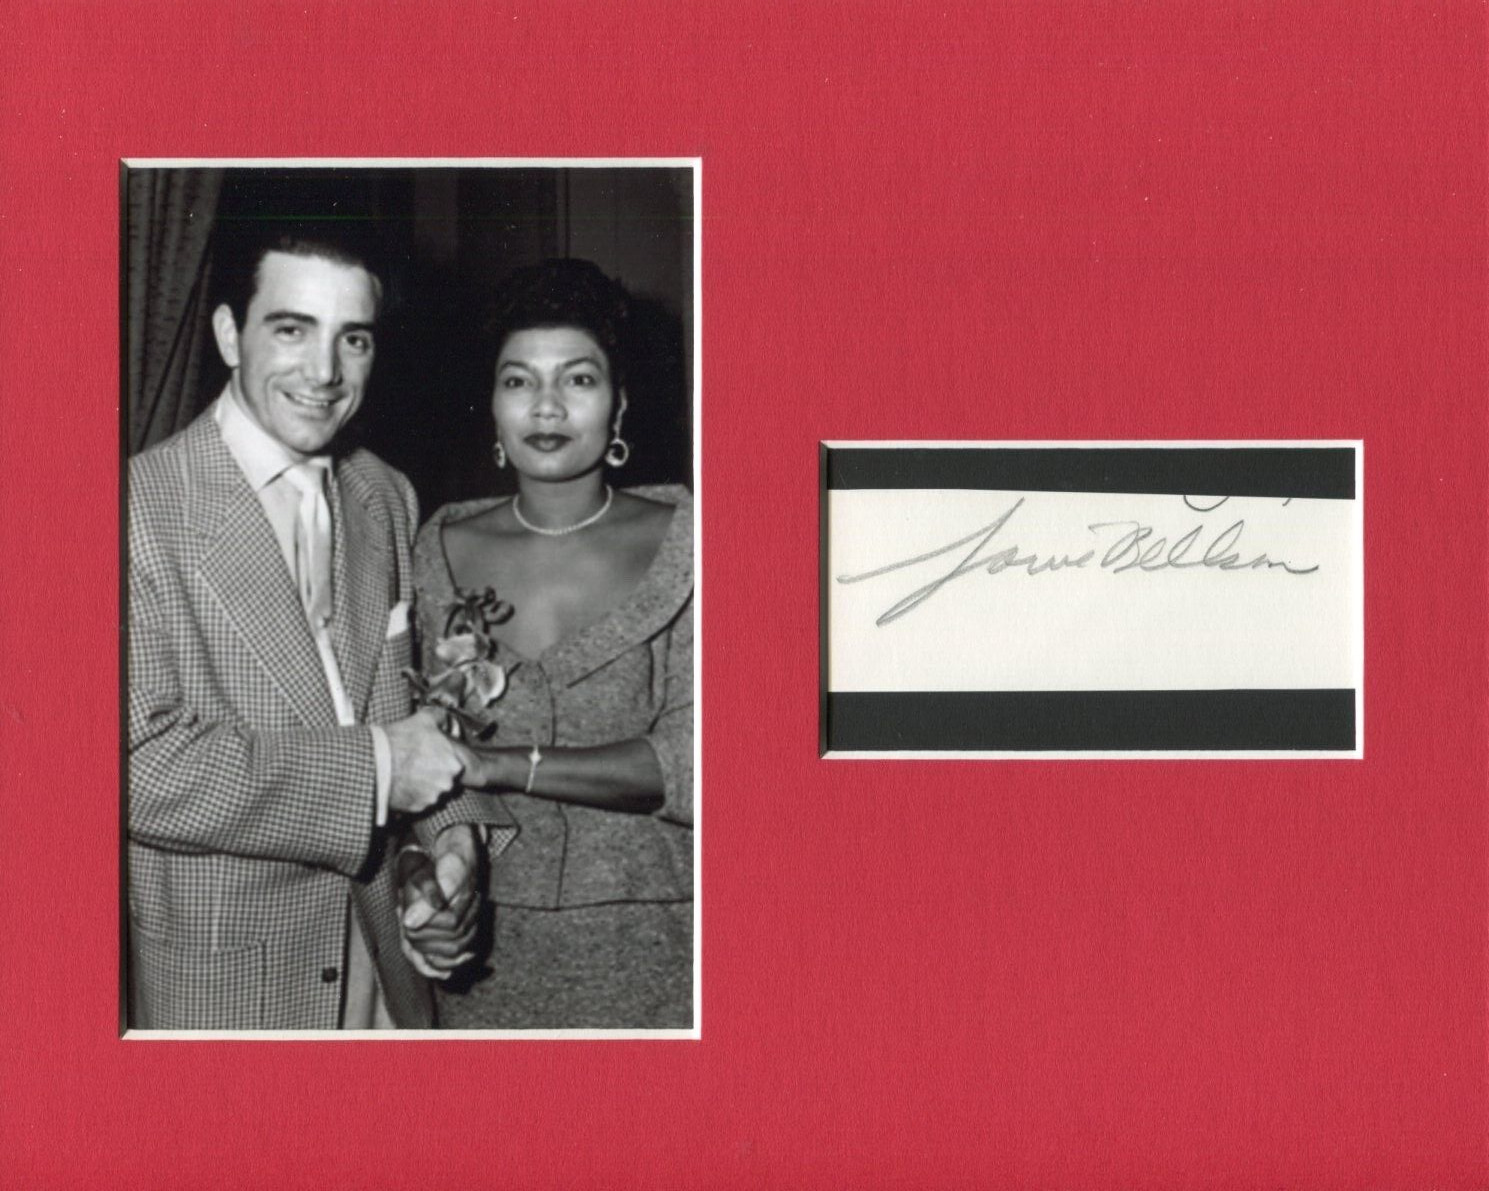 Louie Bellson Jazz Drummer Signed Autograph Photo Display With Pearl Bailey